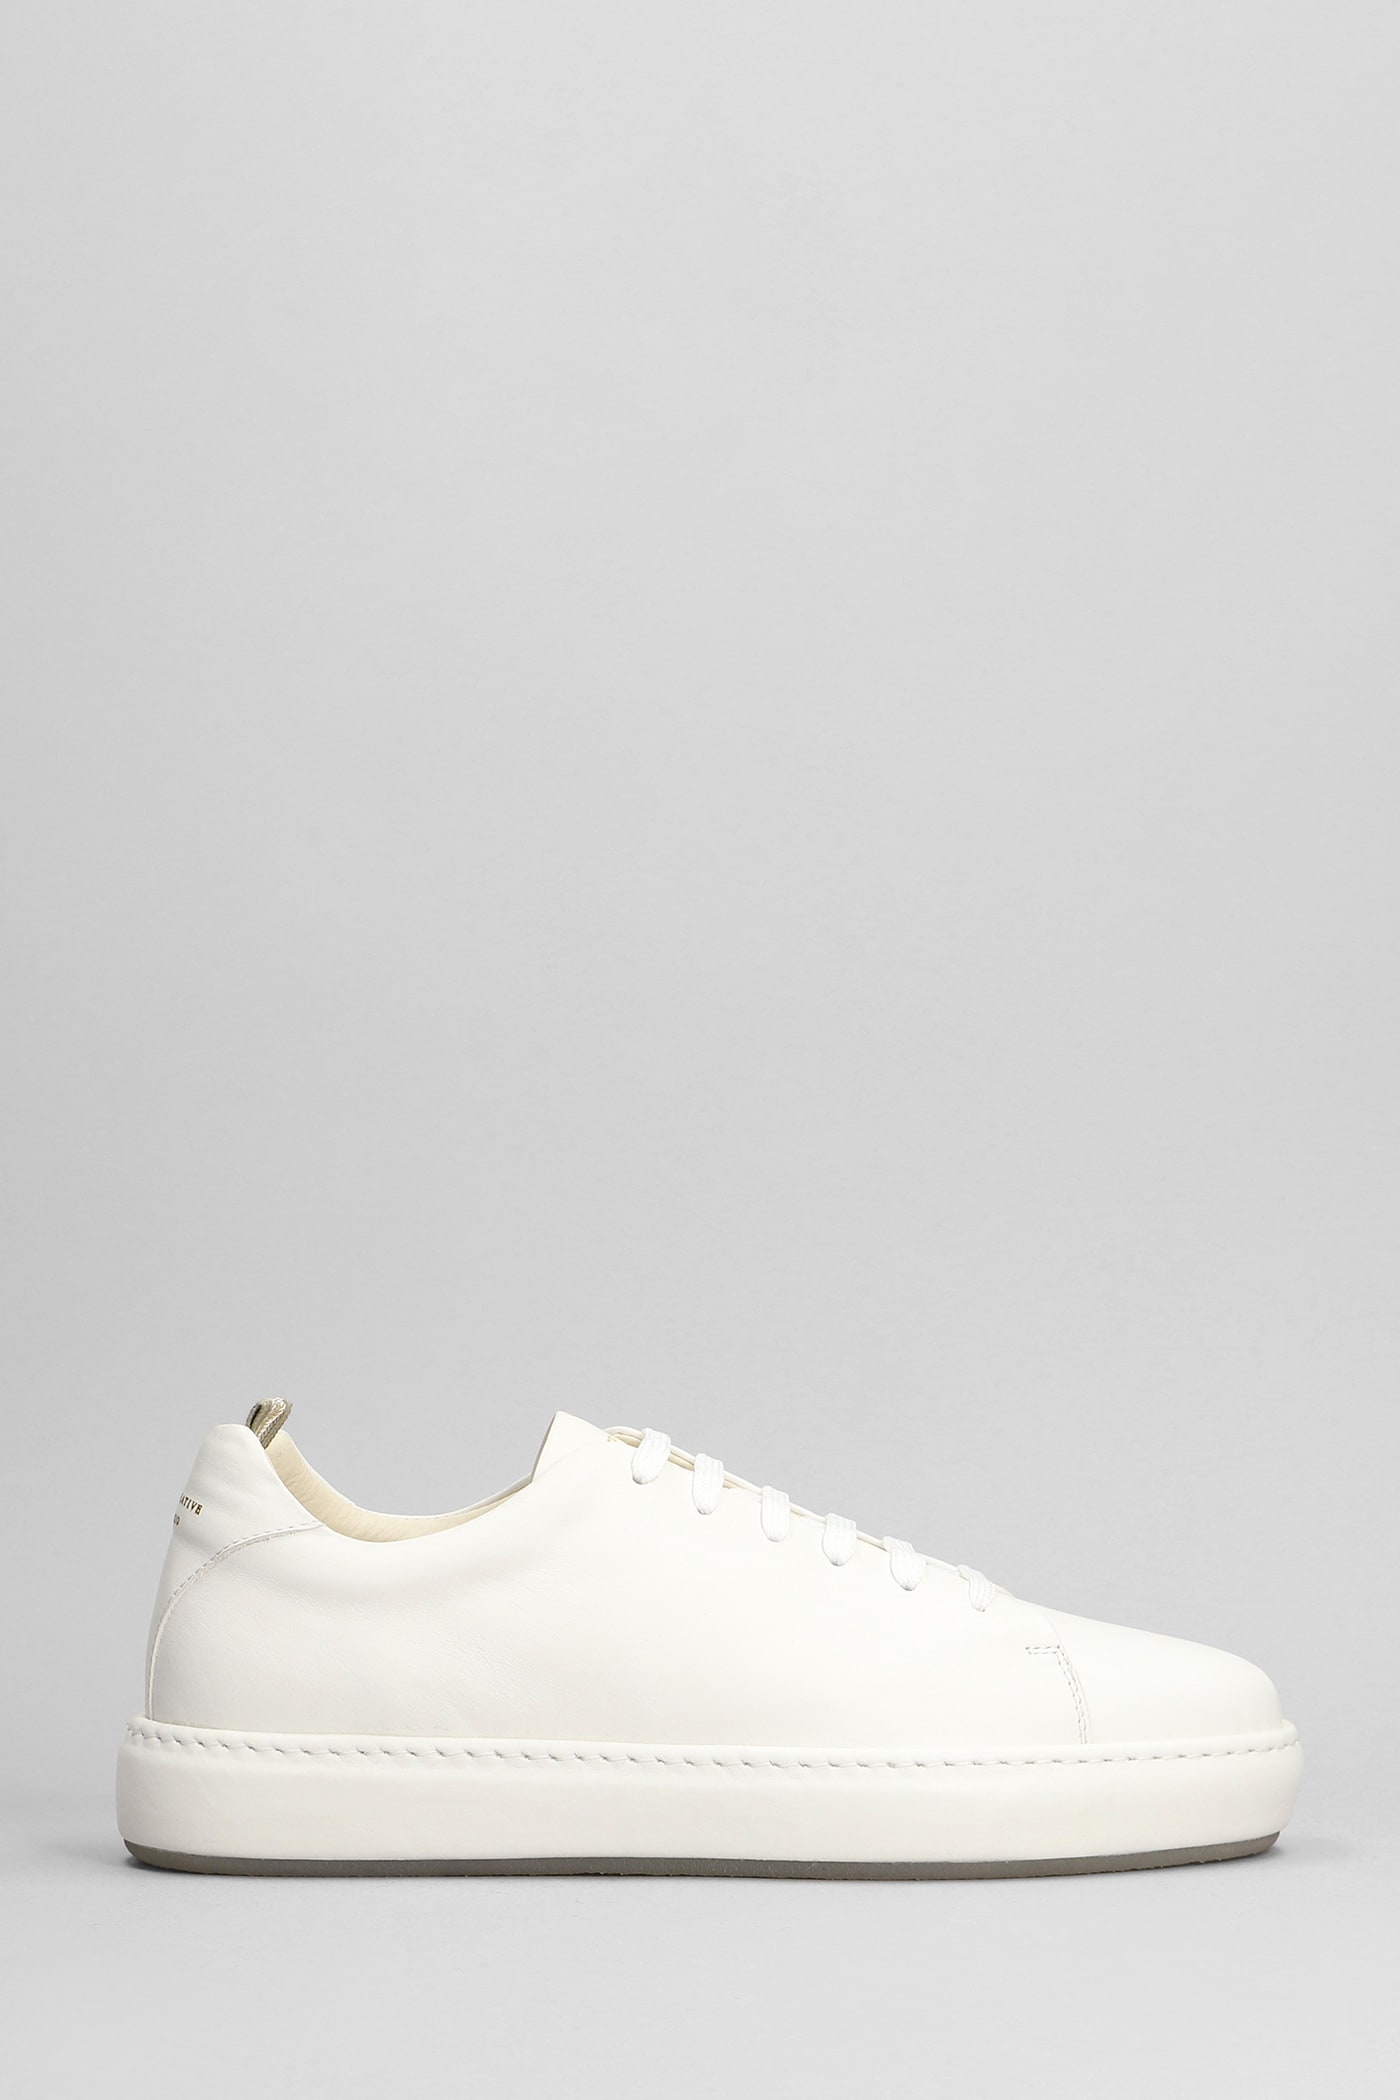 Officine Creative Covered 001 Trainers In White Leather